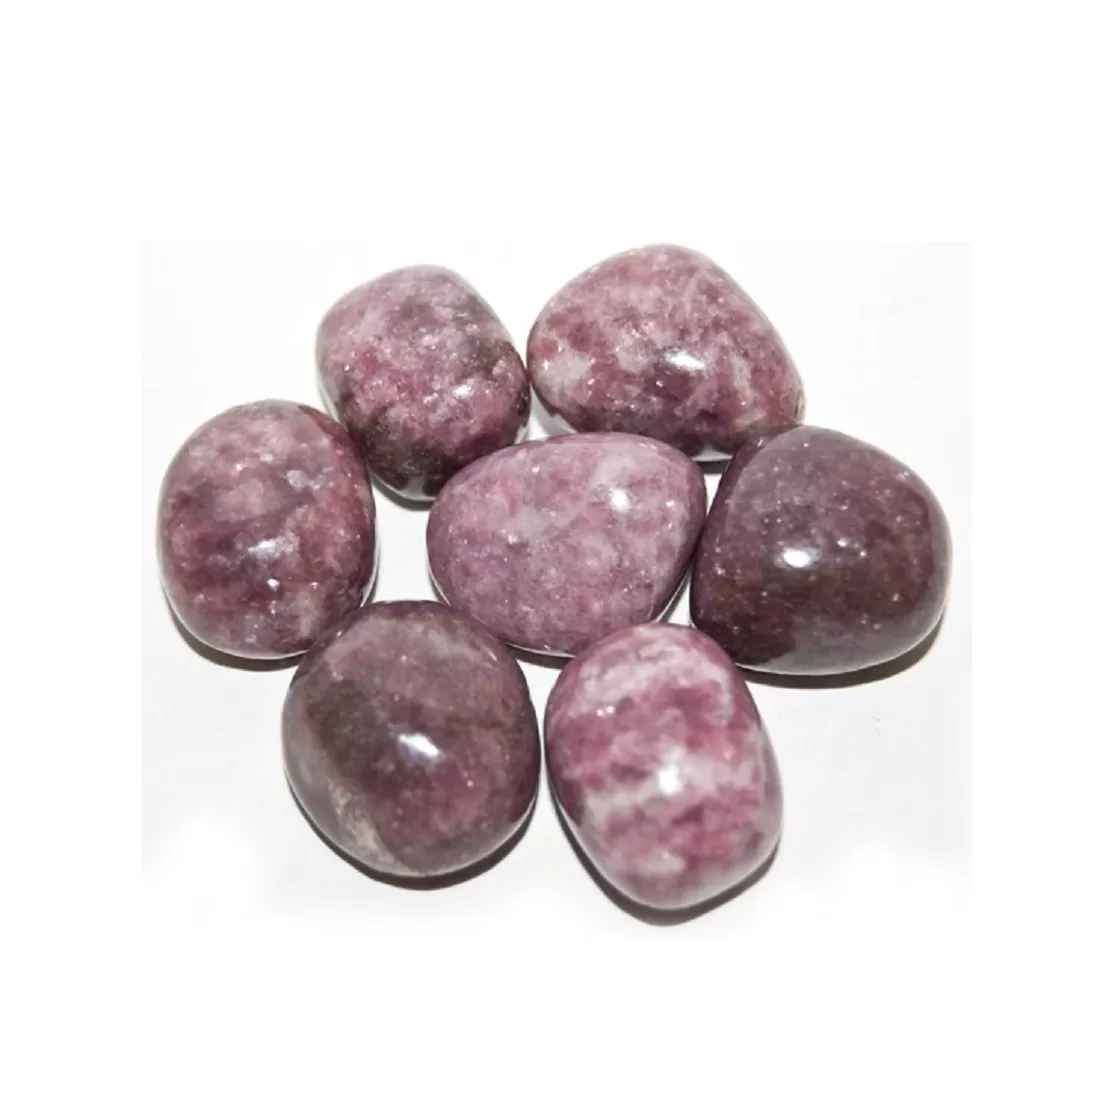 Reiki Crystal Products Natural Lepidolite Tumble Stones for Reiki Healing and Vastu Correction Protection Concentration Spirituality and Increasing Creativity Tumble Stones:50GM 